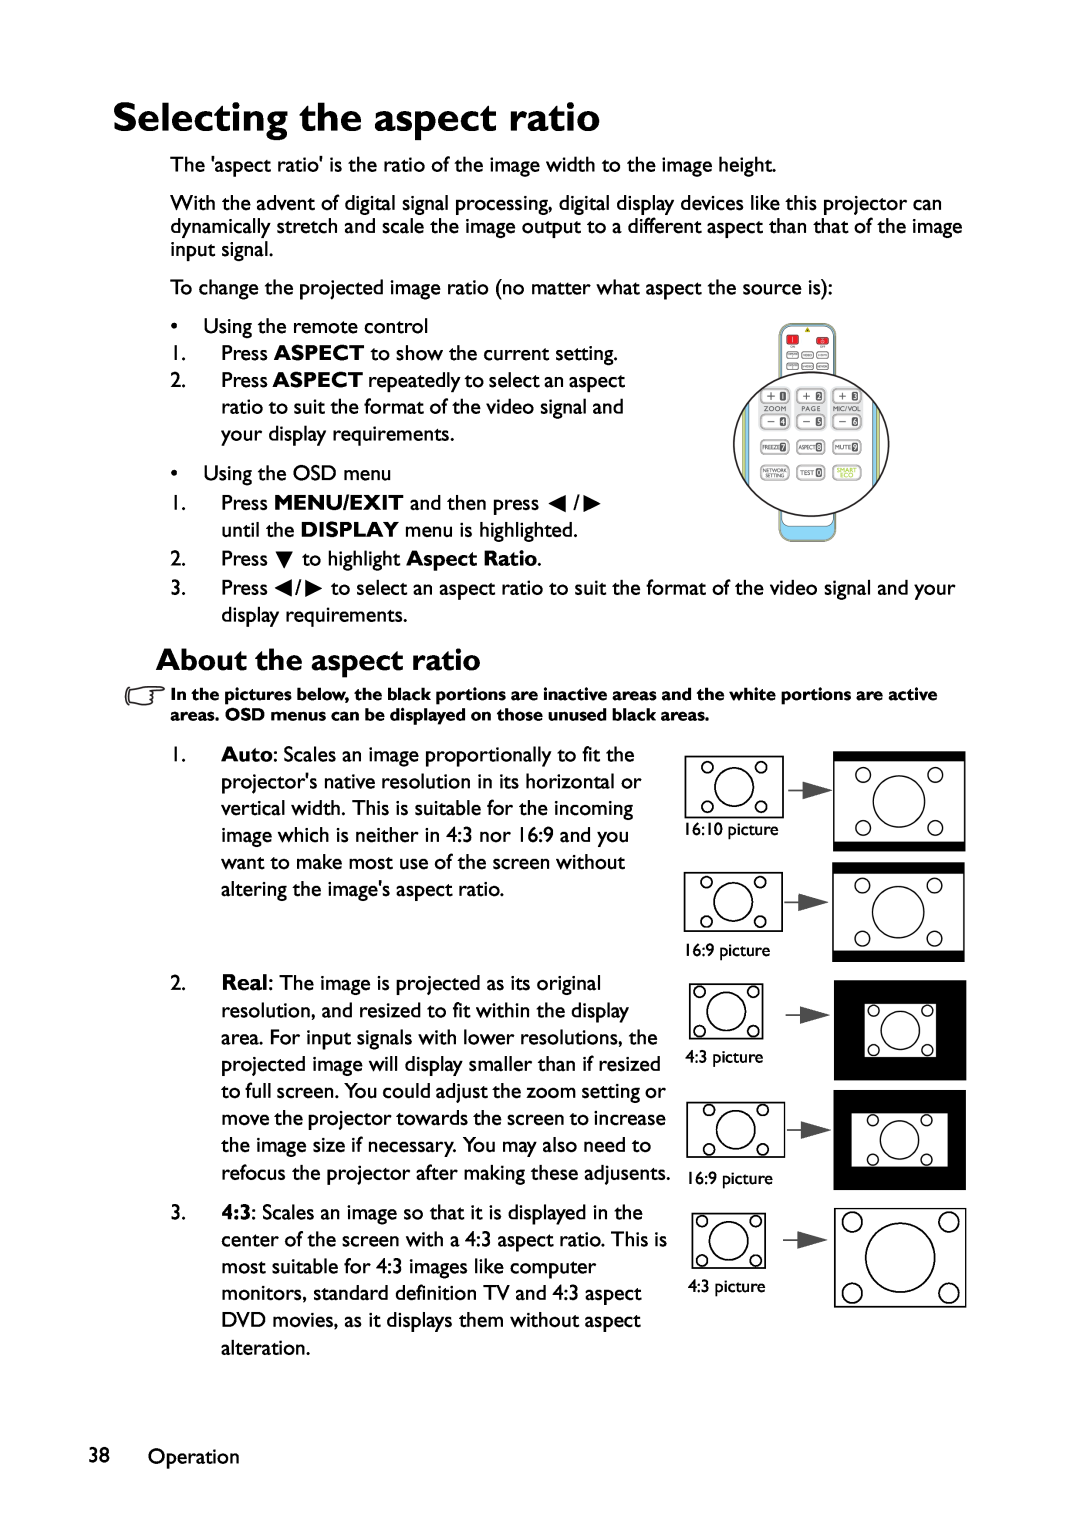 BenQ MX822ST, MX766, MW767 user manual Selecting the aspect ratio, About the aspect ratio 